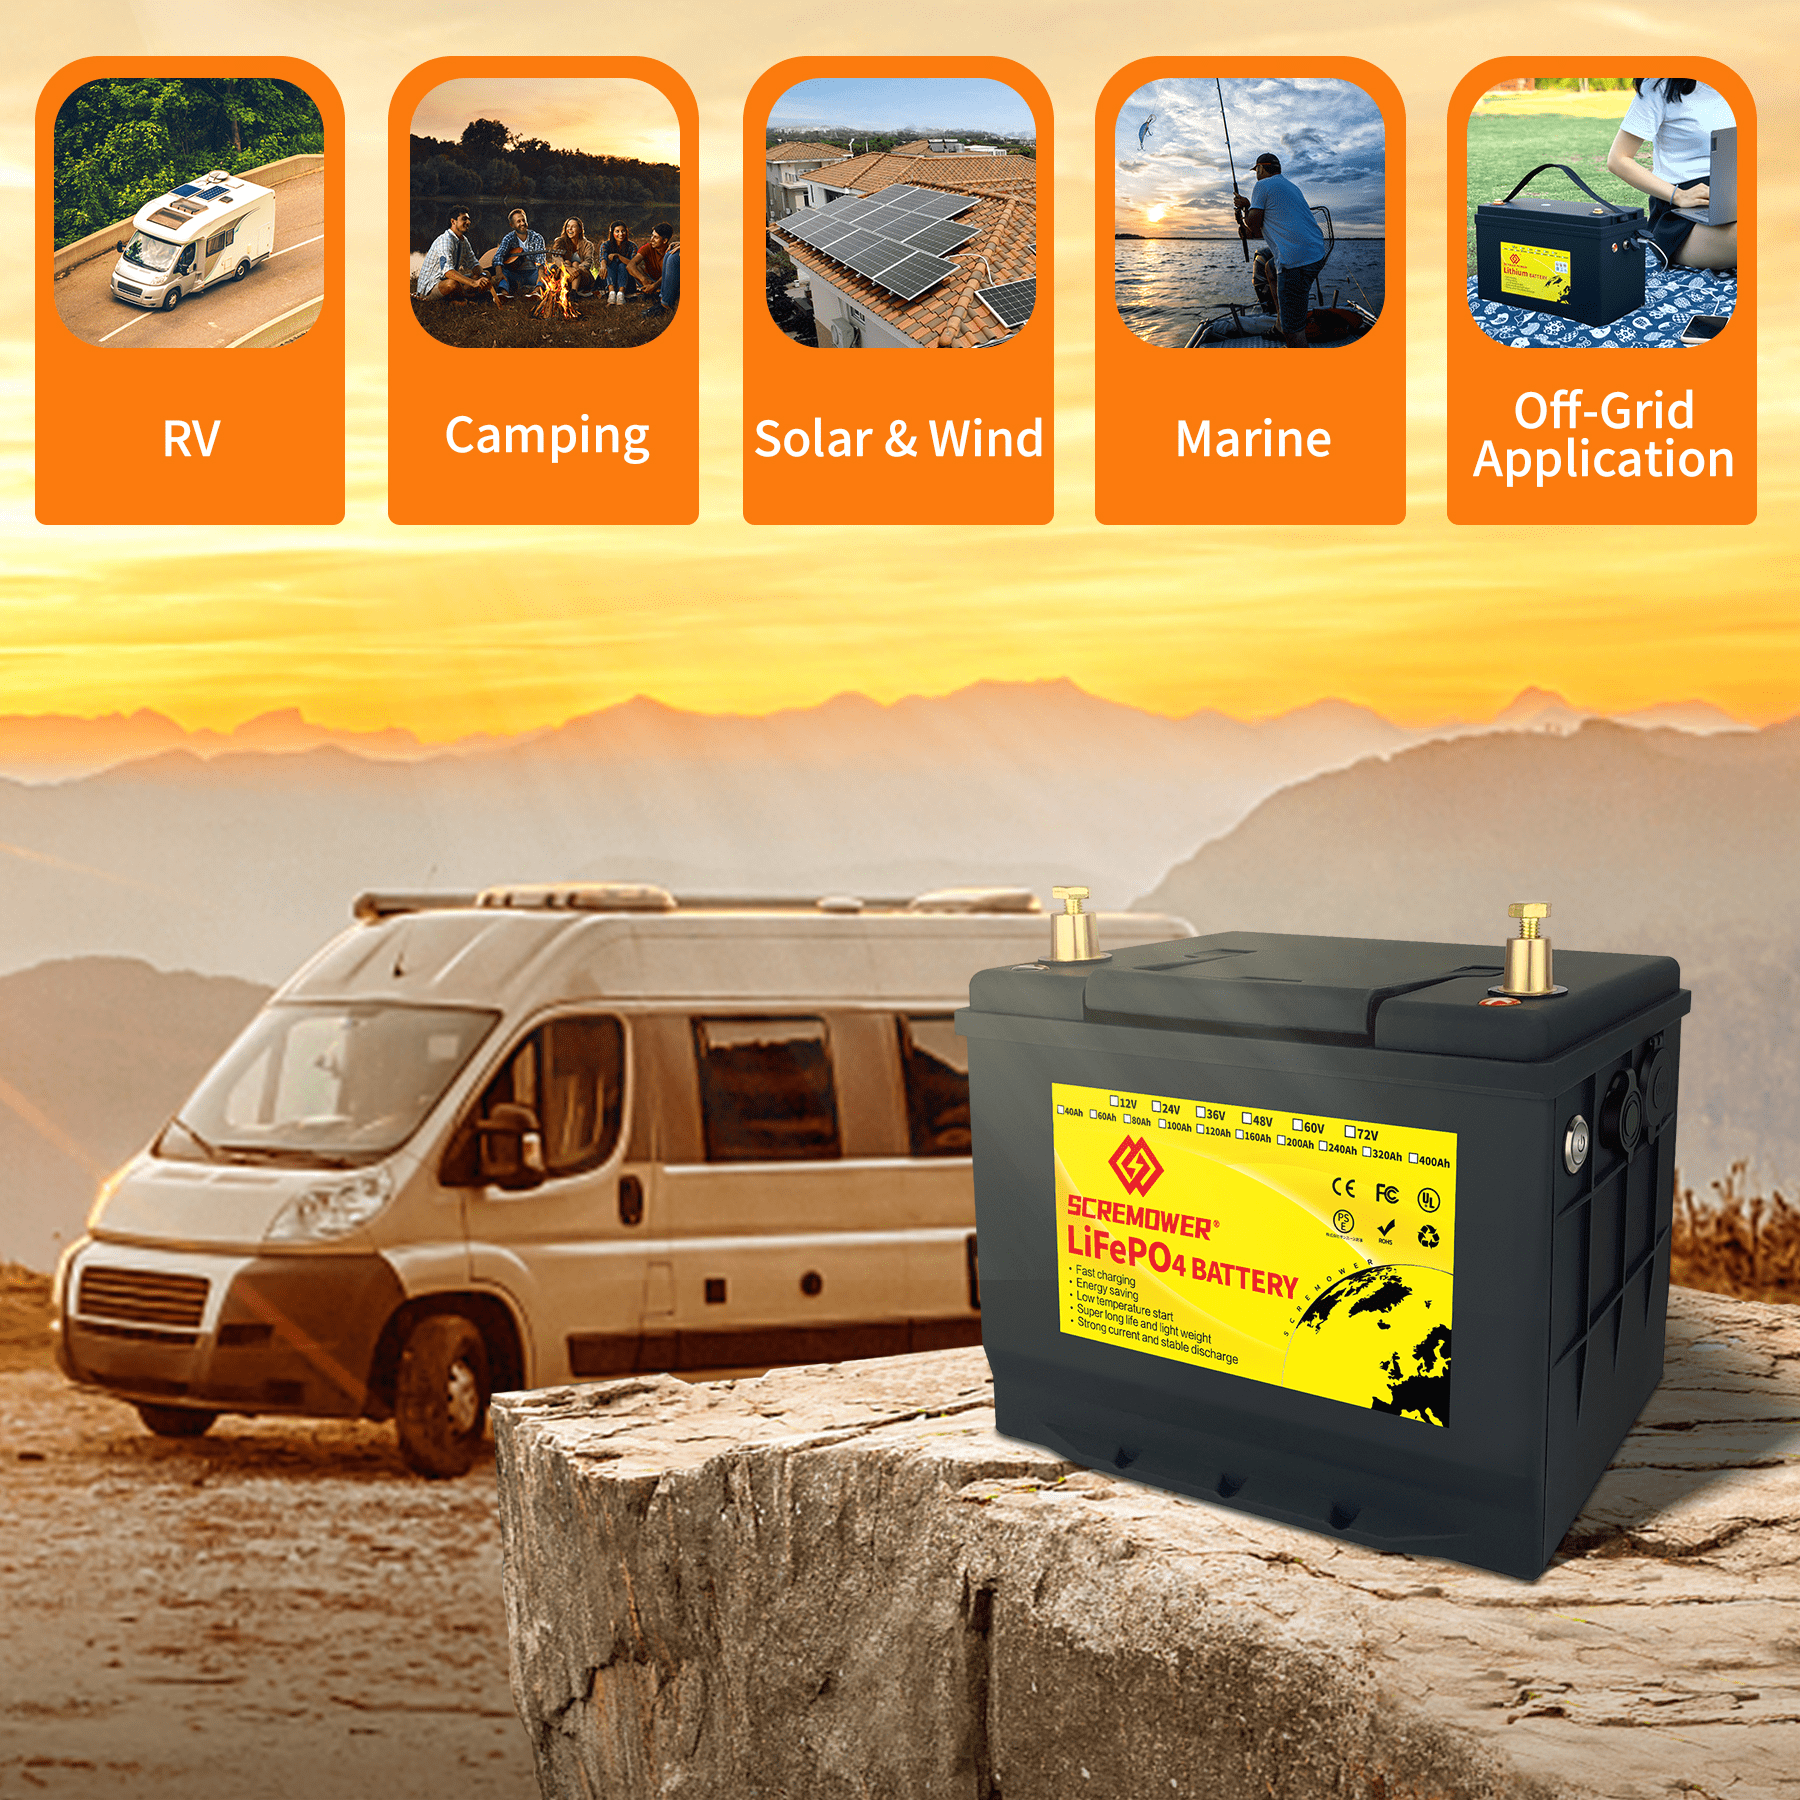 12V 60Ah LiFePO4 Battery Deep Cycle Lithium Iron Phosphate Battery Built-in  BMS Lightweight Maintenance-Free Perfect for RV/Camping, Solar/Backup